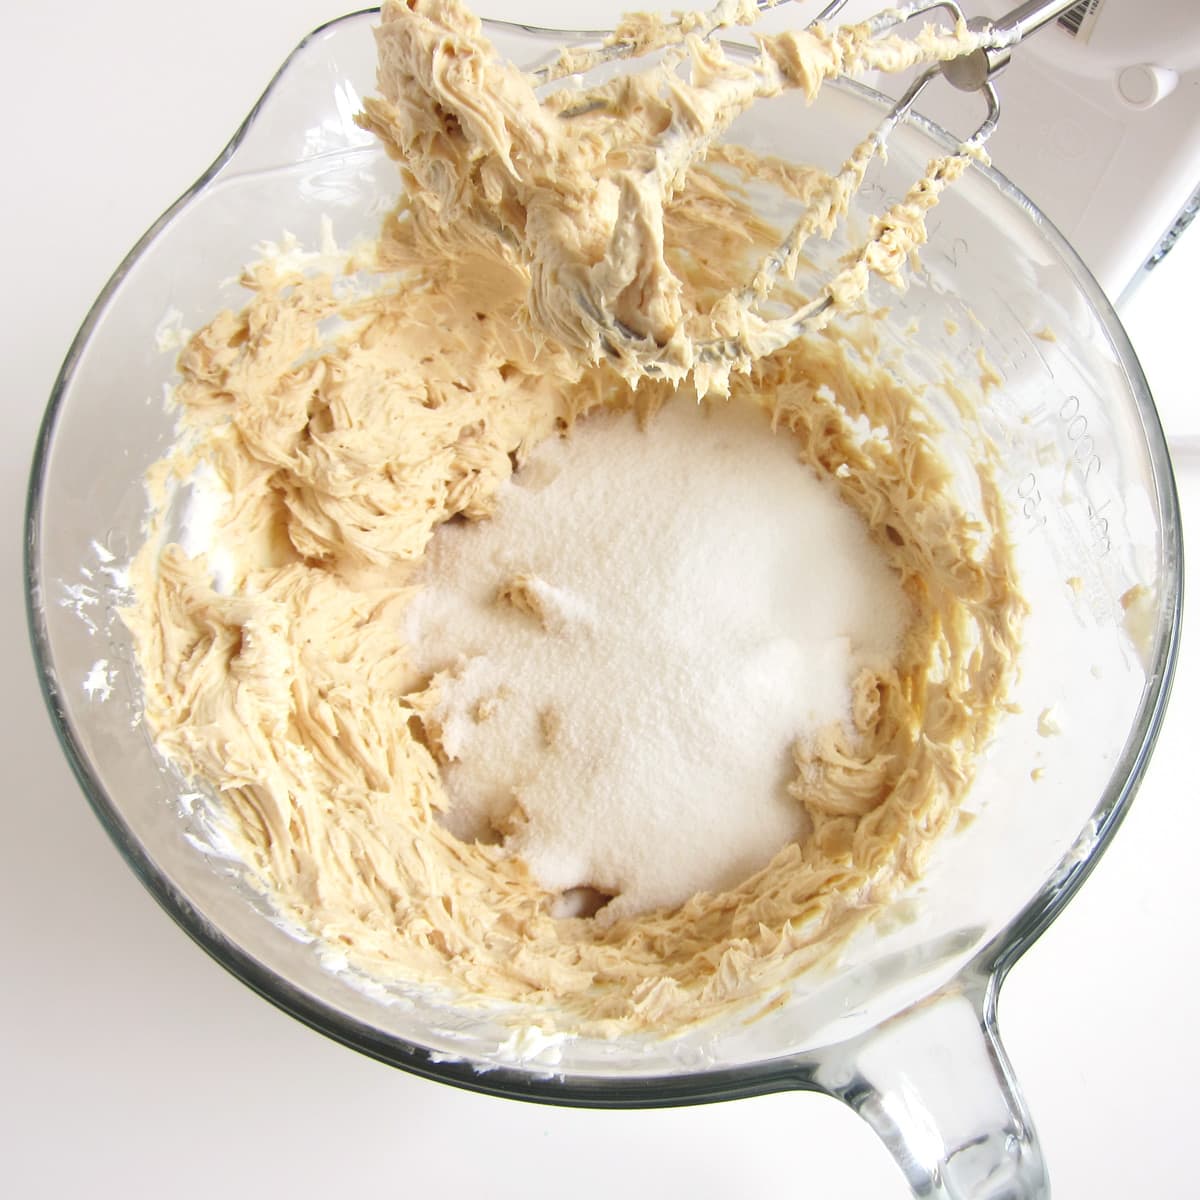 sugar added to whipped cream cheese and butter.